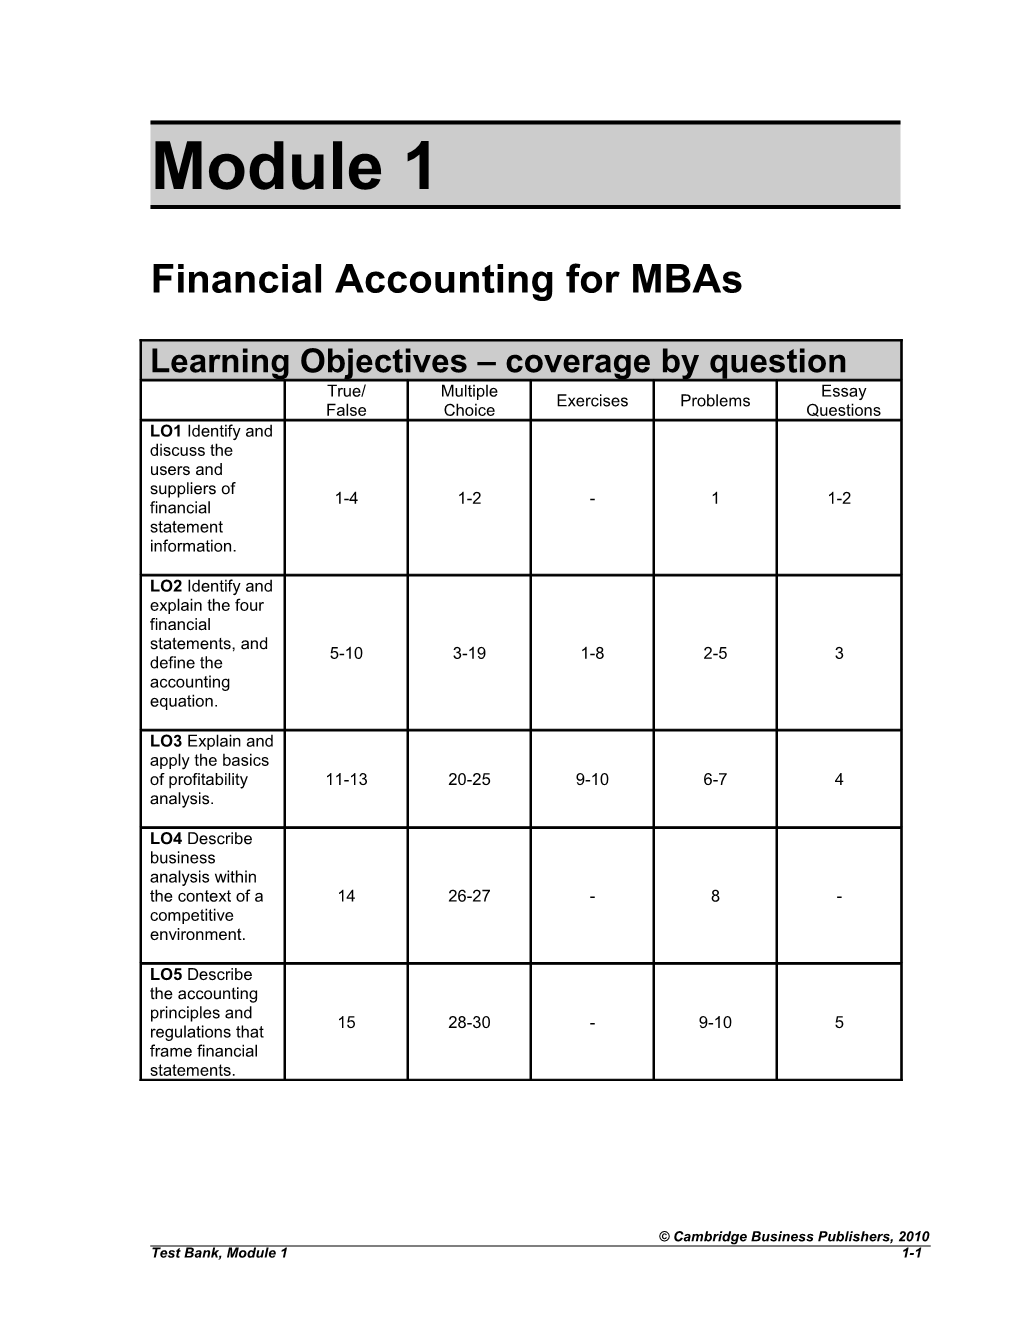 Module 1: Financial Accounting for Mbas